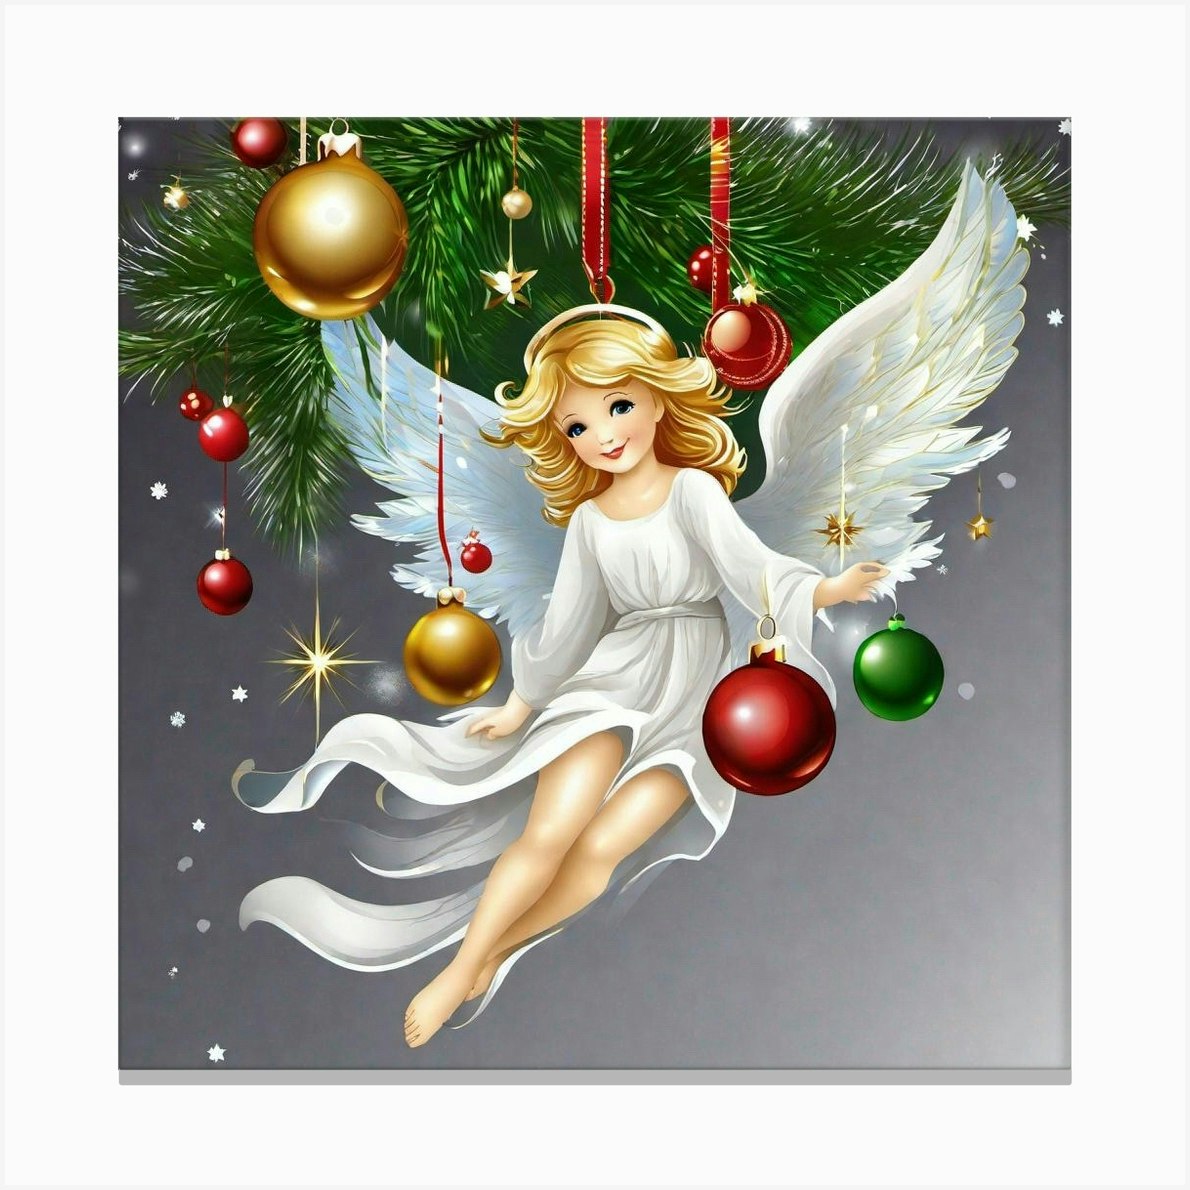 Angel Christmas Noctarius Canvas - 1 by Print Fy Tree